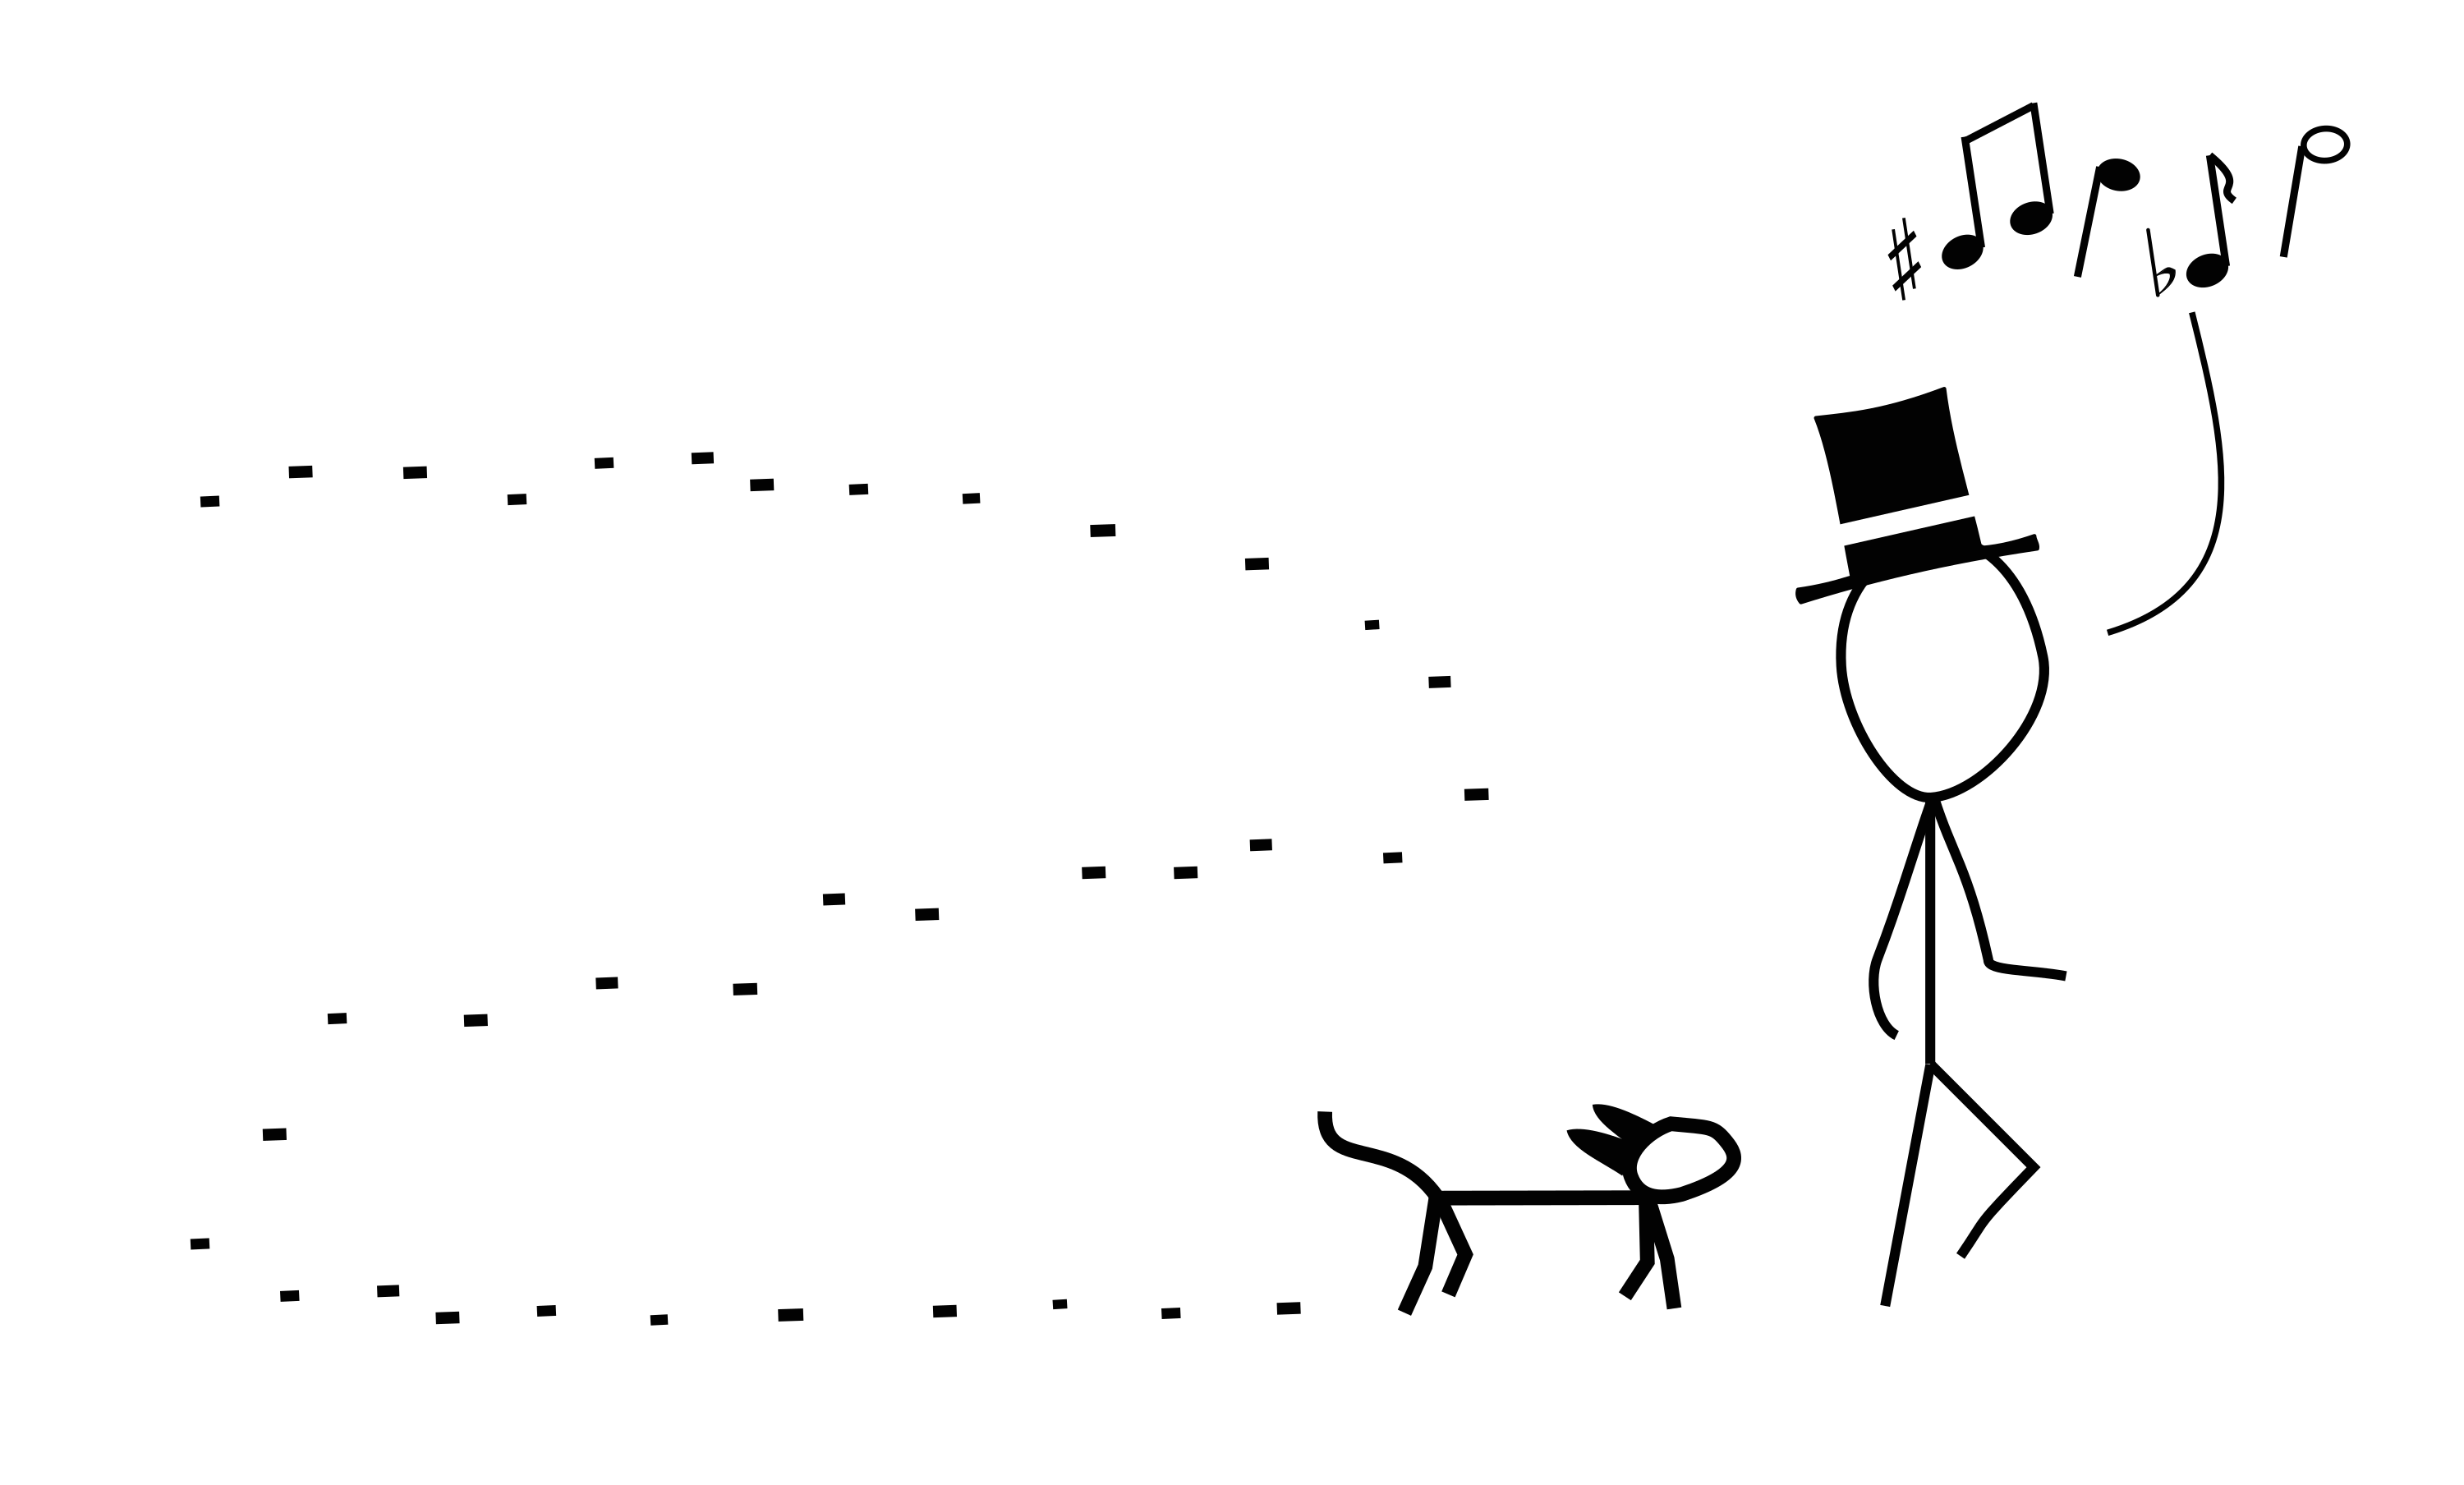 Wondering cat and hatted figure